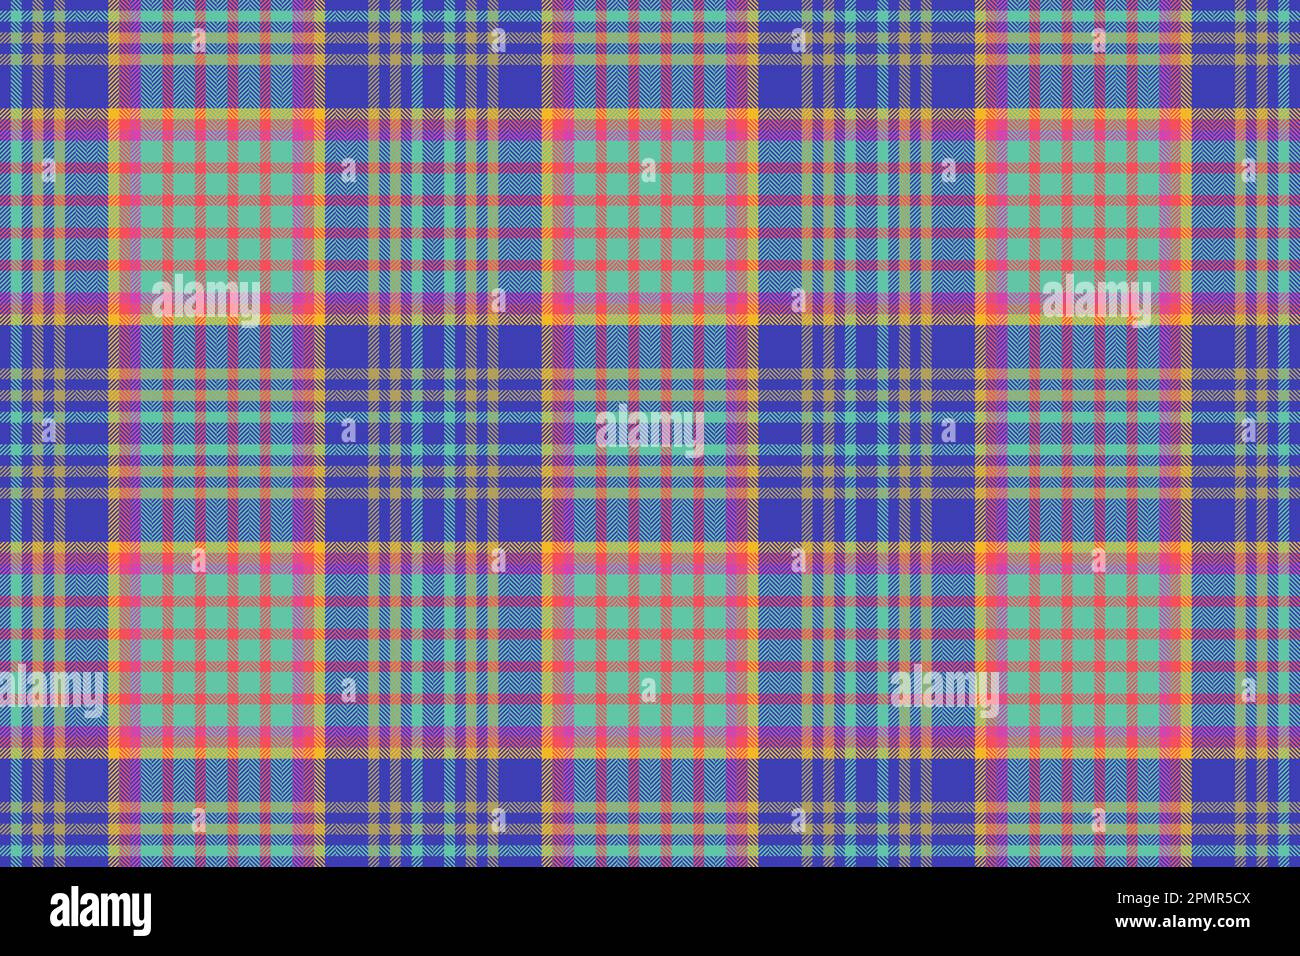 Fabric tartan plaid. Texture seamless vector. Pattern background check textile in blue and yellow colors. Stock Vector